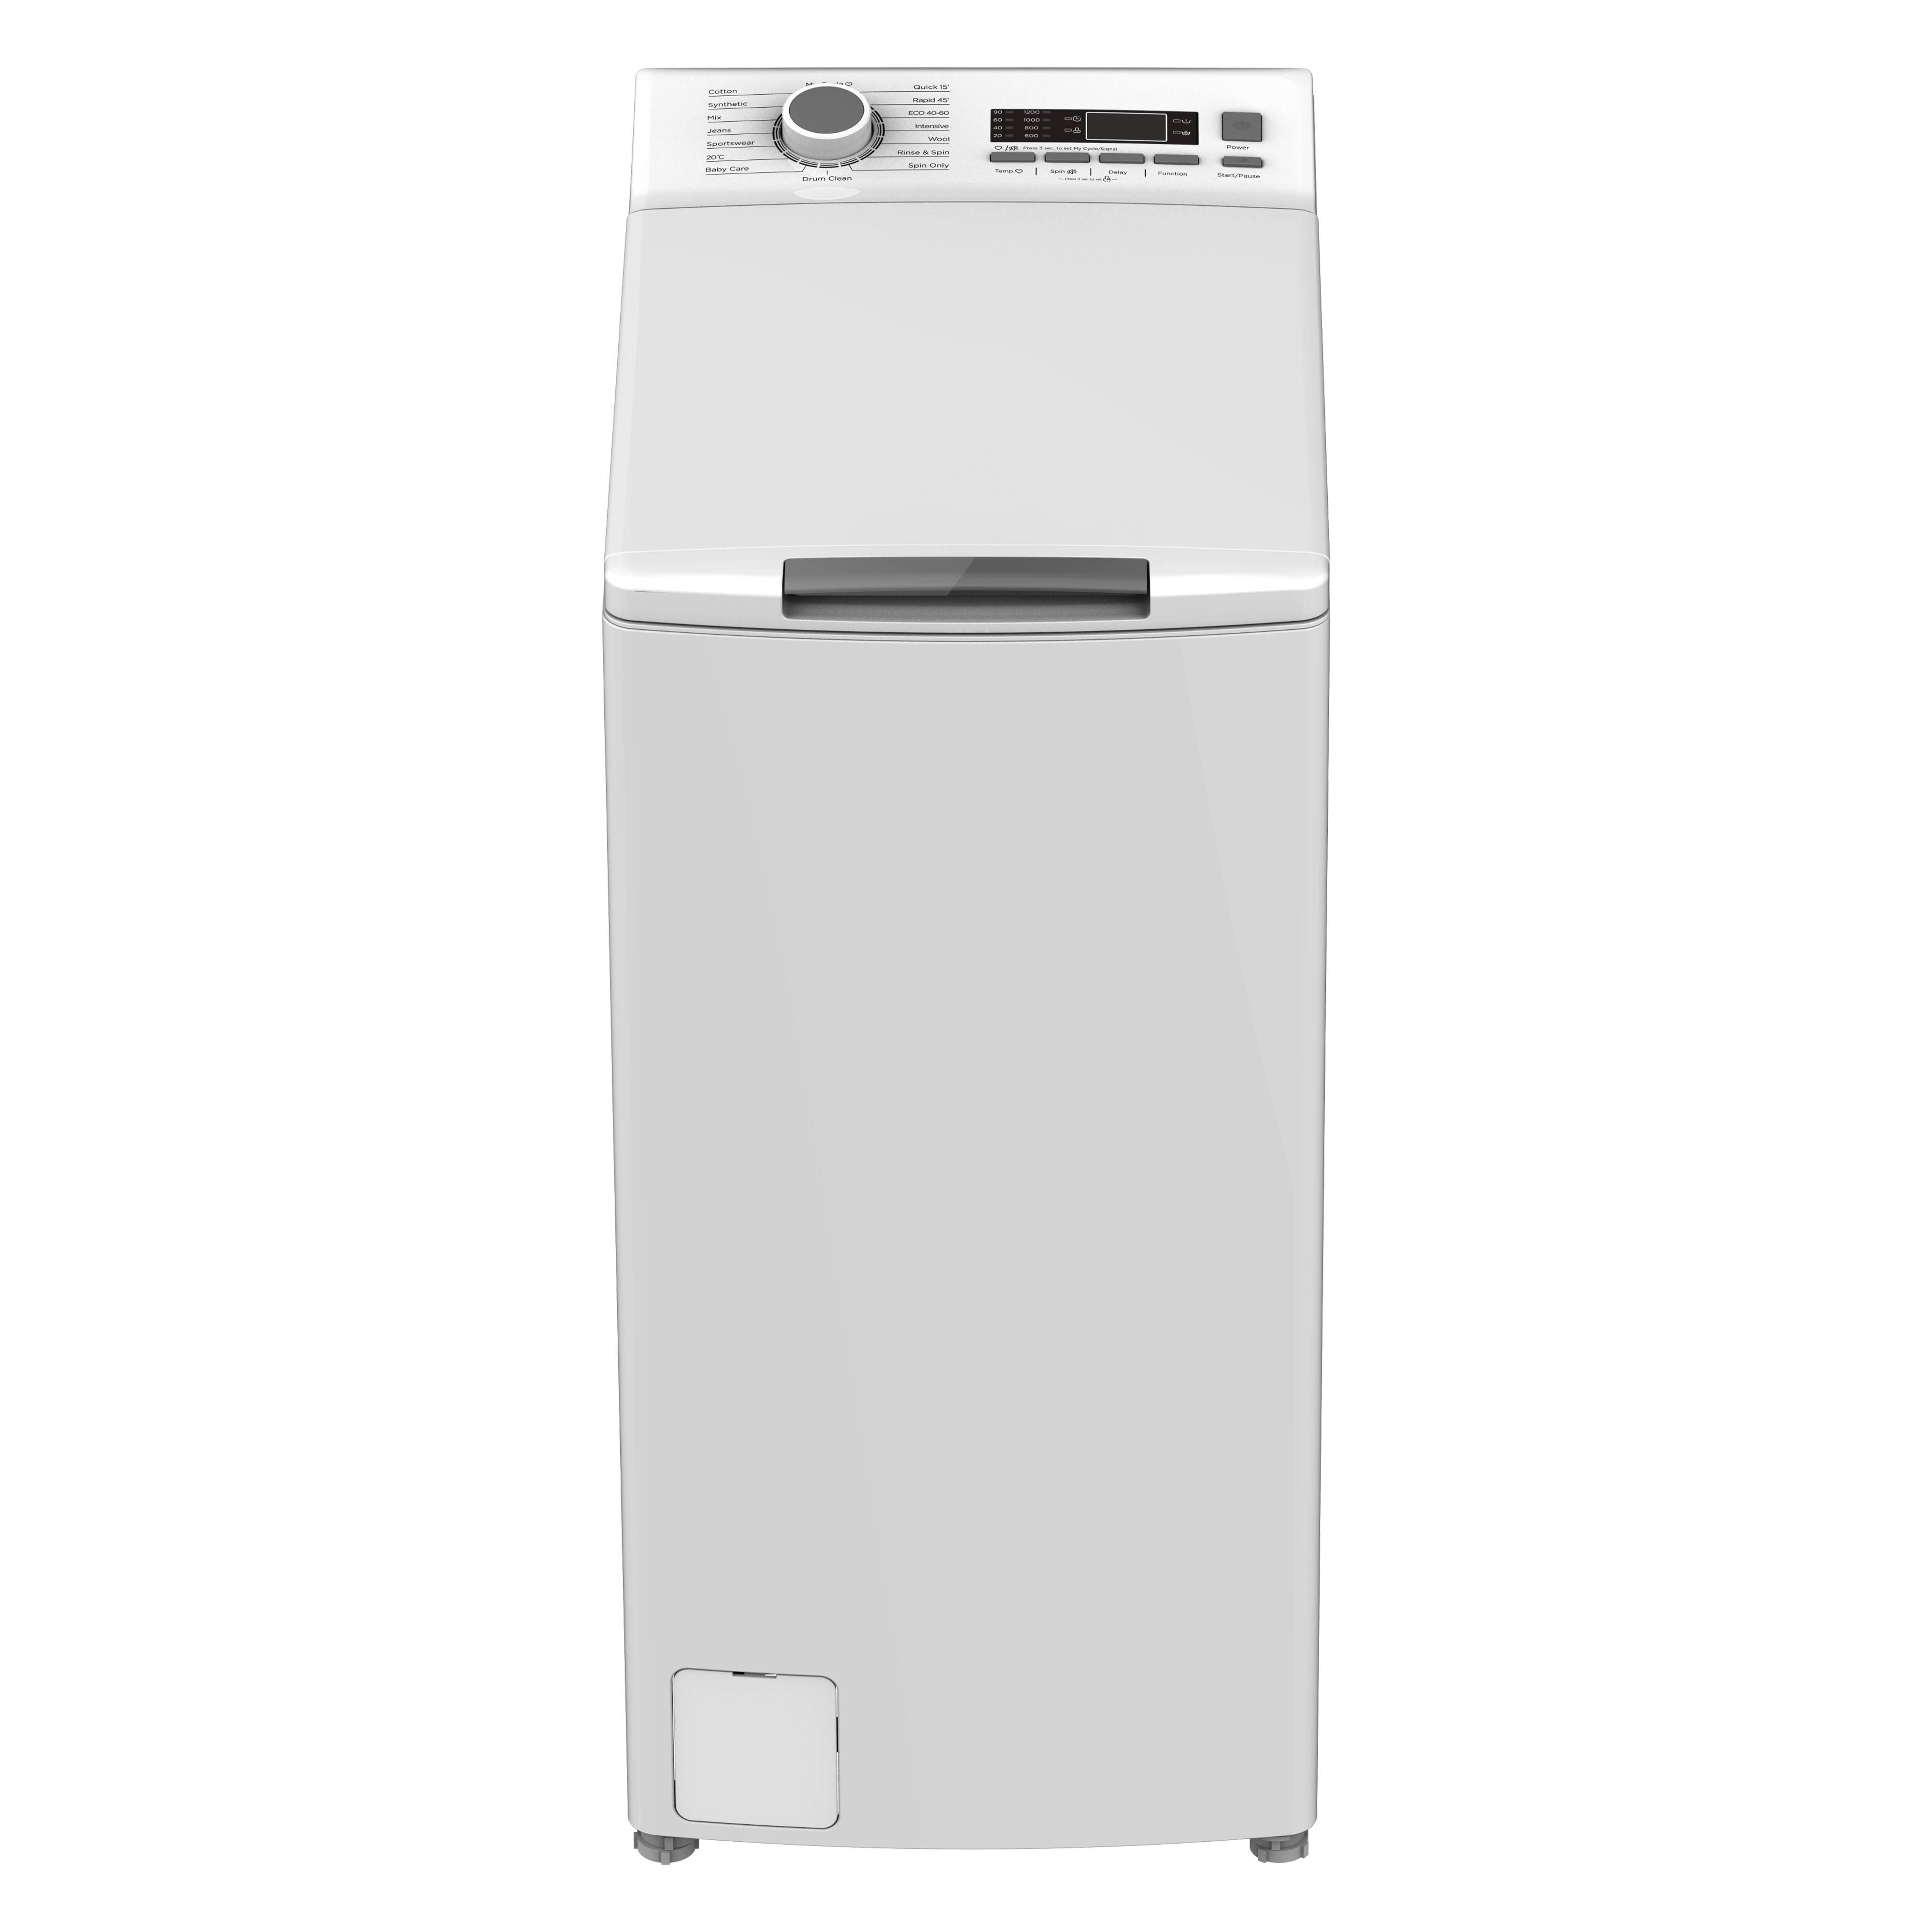 Top-In Series 12  Washer